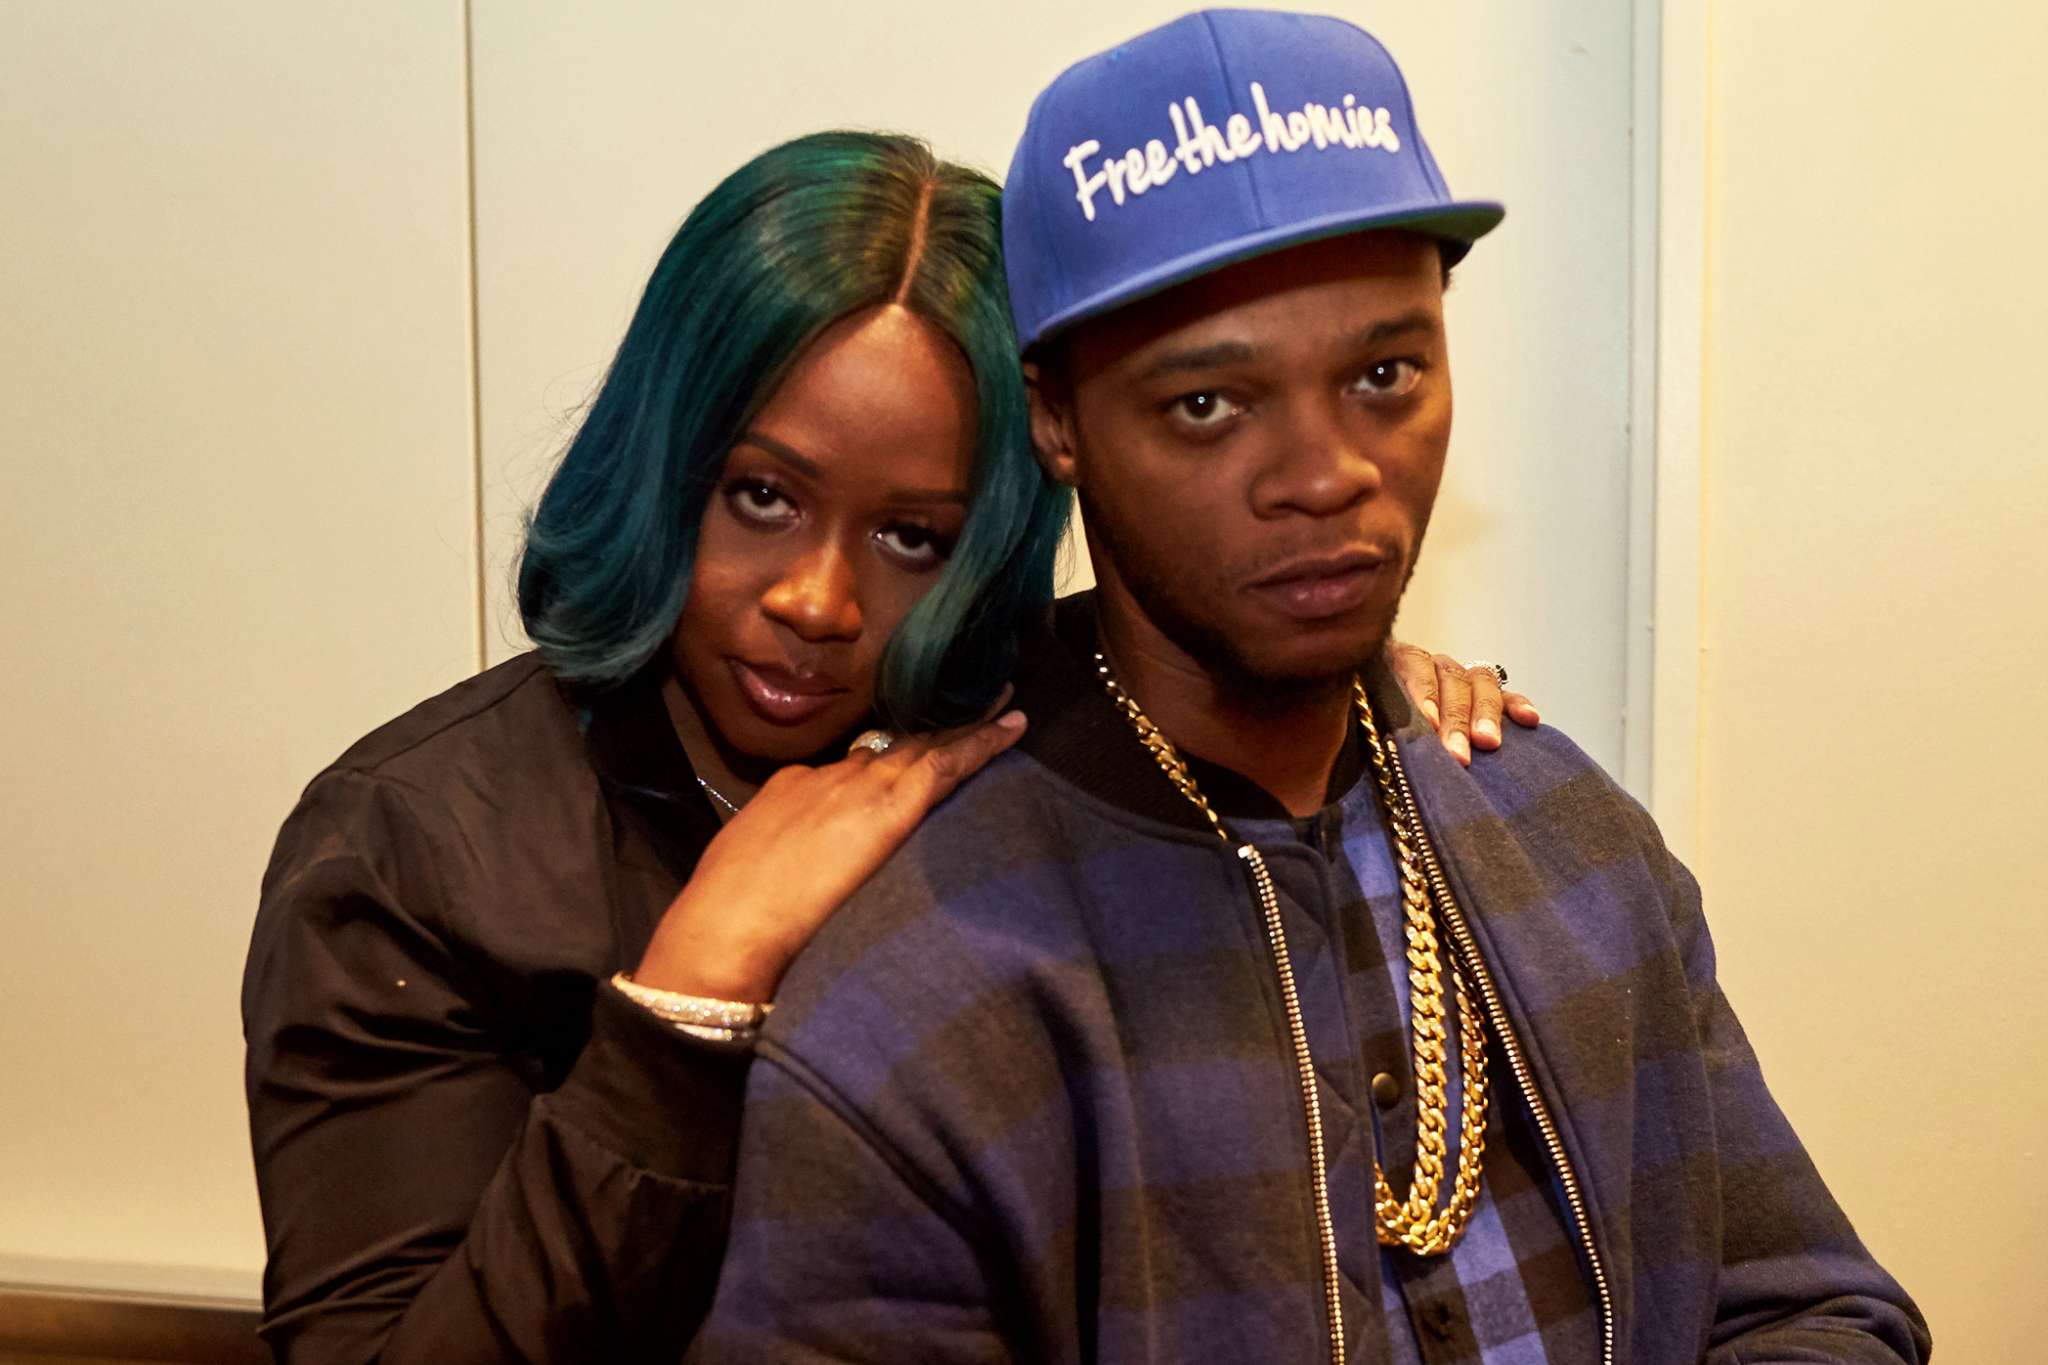 Remy Ma Wishes A Happy Birthday To Her Beloved Hubby, Papoose - Read Her Romantic Message